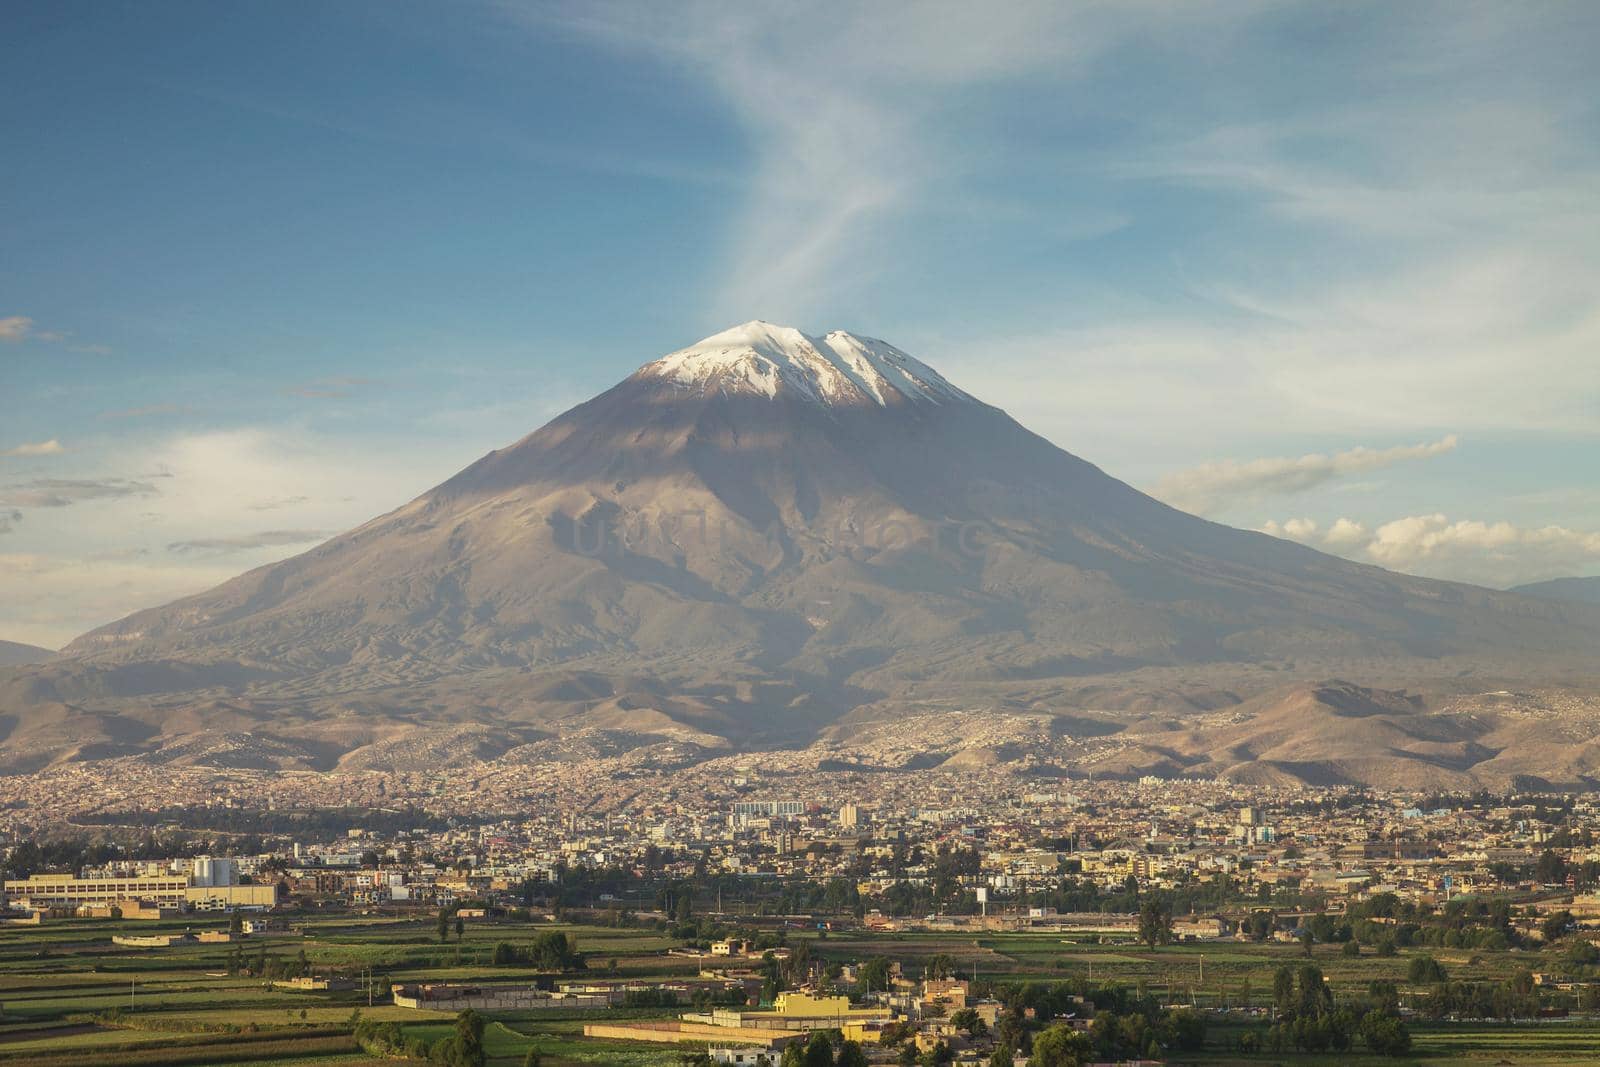 City of Arequipa in Peru with its iconic volcano Misti in the background.